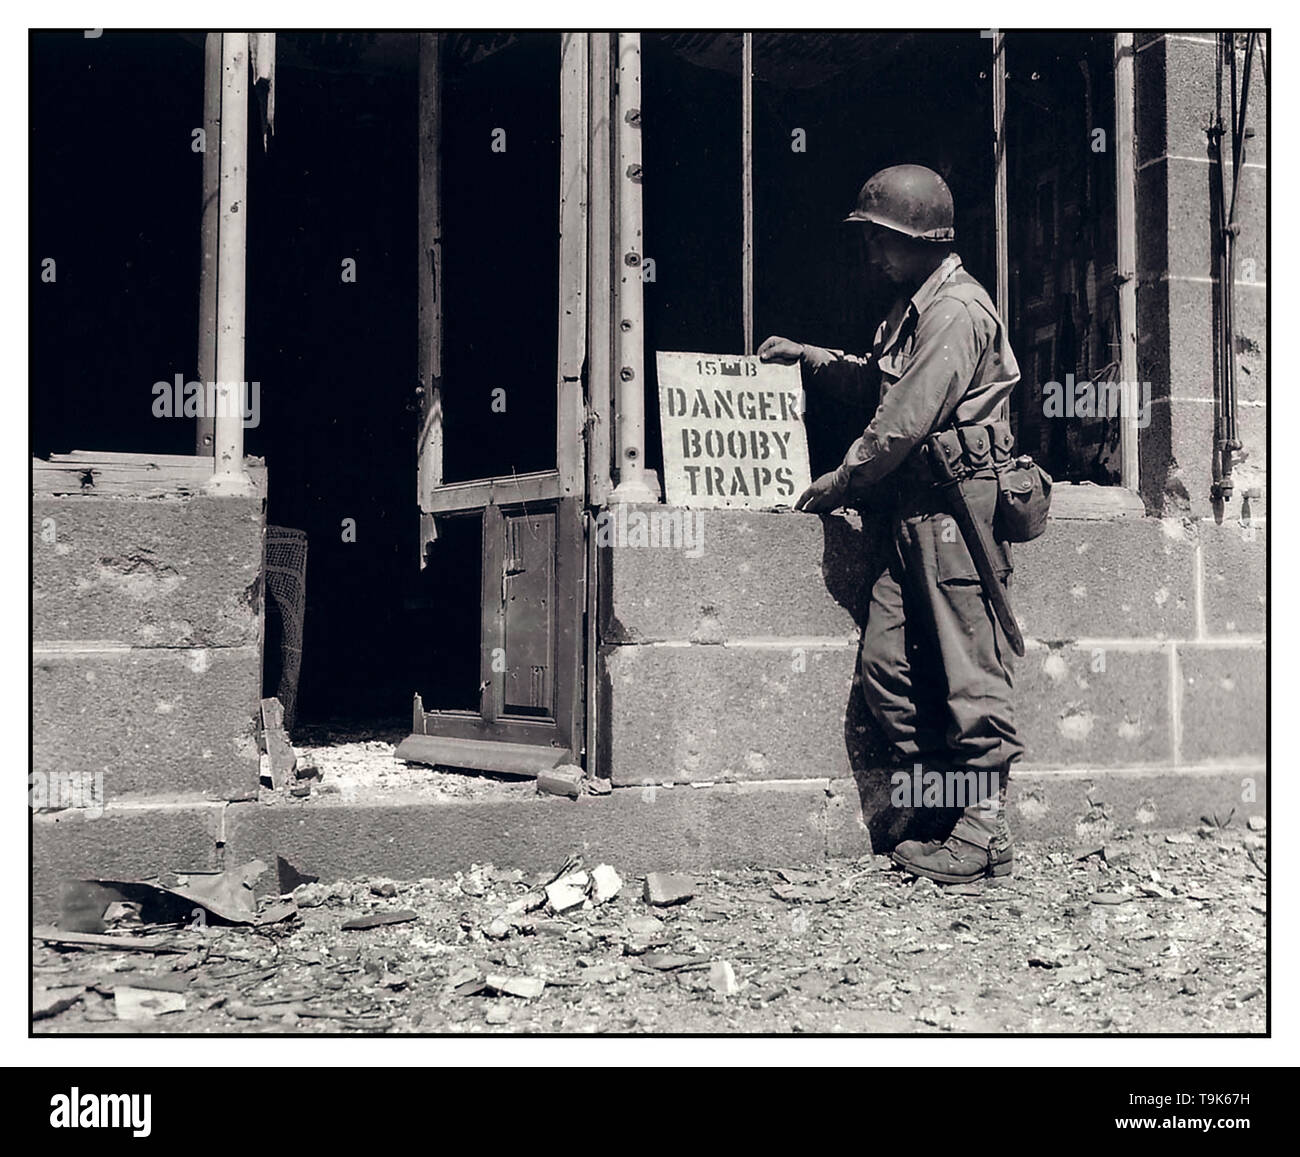 WW2 1940's archive image of American GI soldier placing a 'Booby Traps' warning notice on a French war damaged house Perriers-en-Beauficel Normandy France August 11 1944 American Baker Company Stock Photo